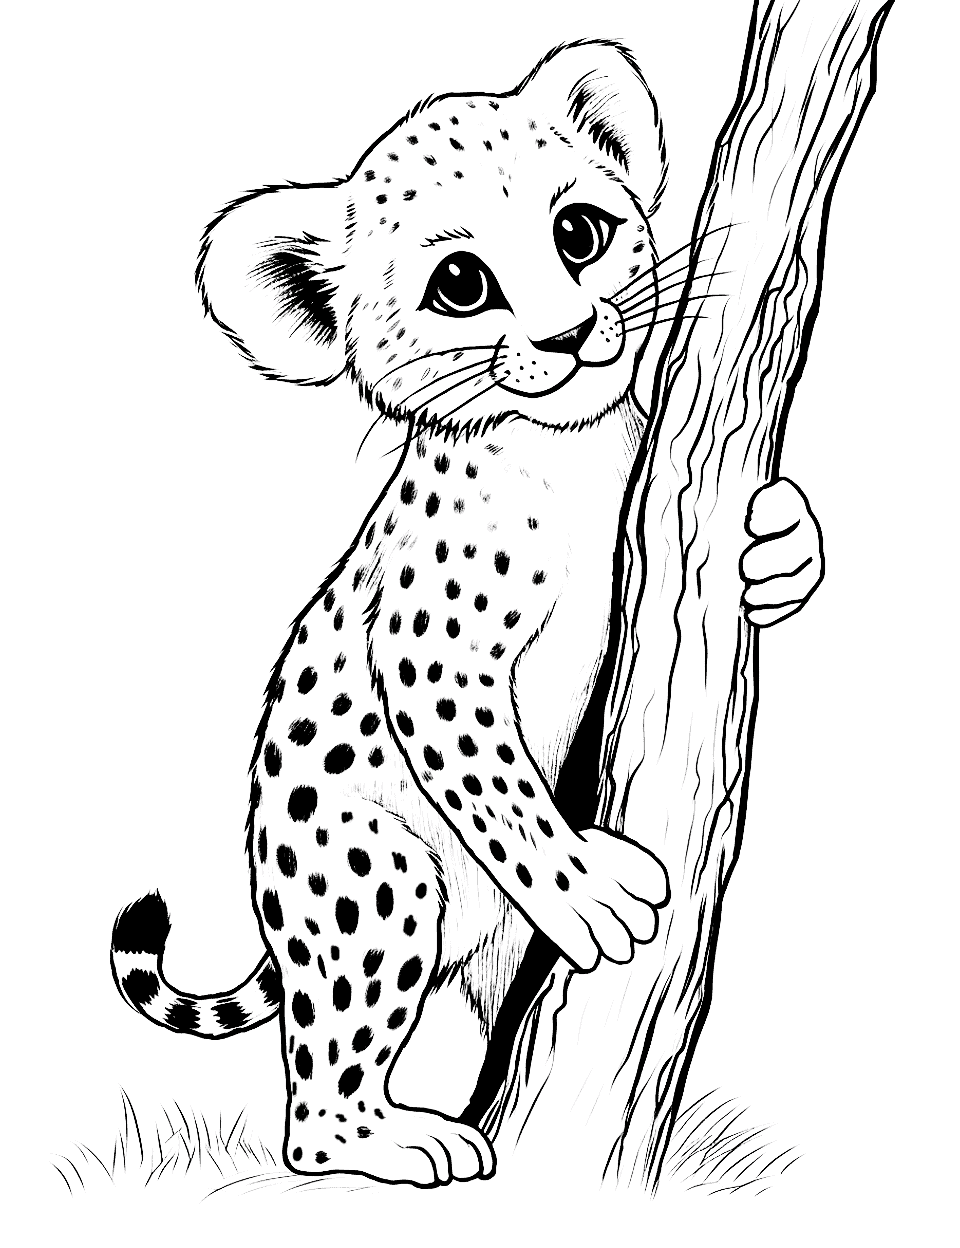 Cheetah Cub Trying to Climb a Tree Coloring Page - A humorous scene of a cheetah cub clumsily trying to climb a tree.